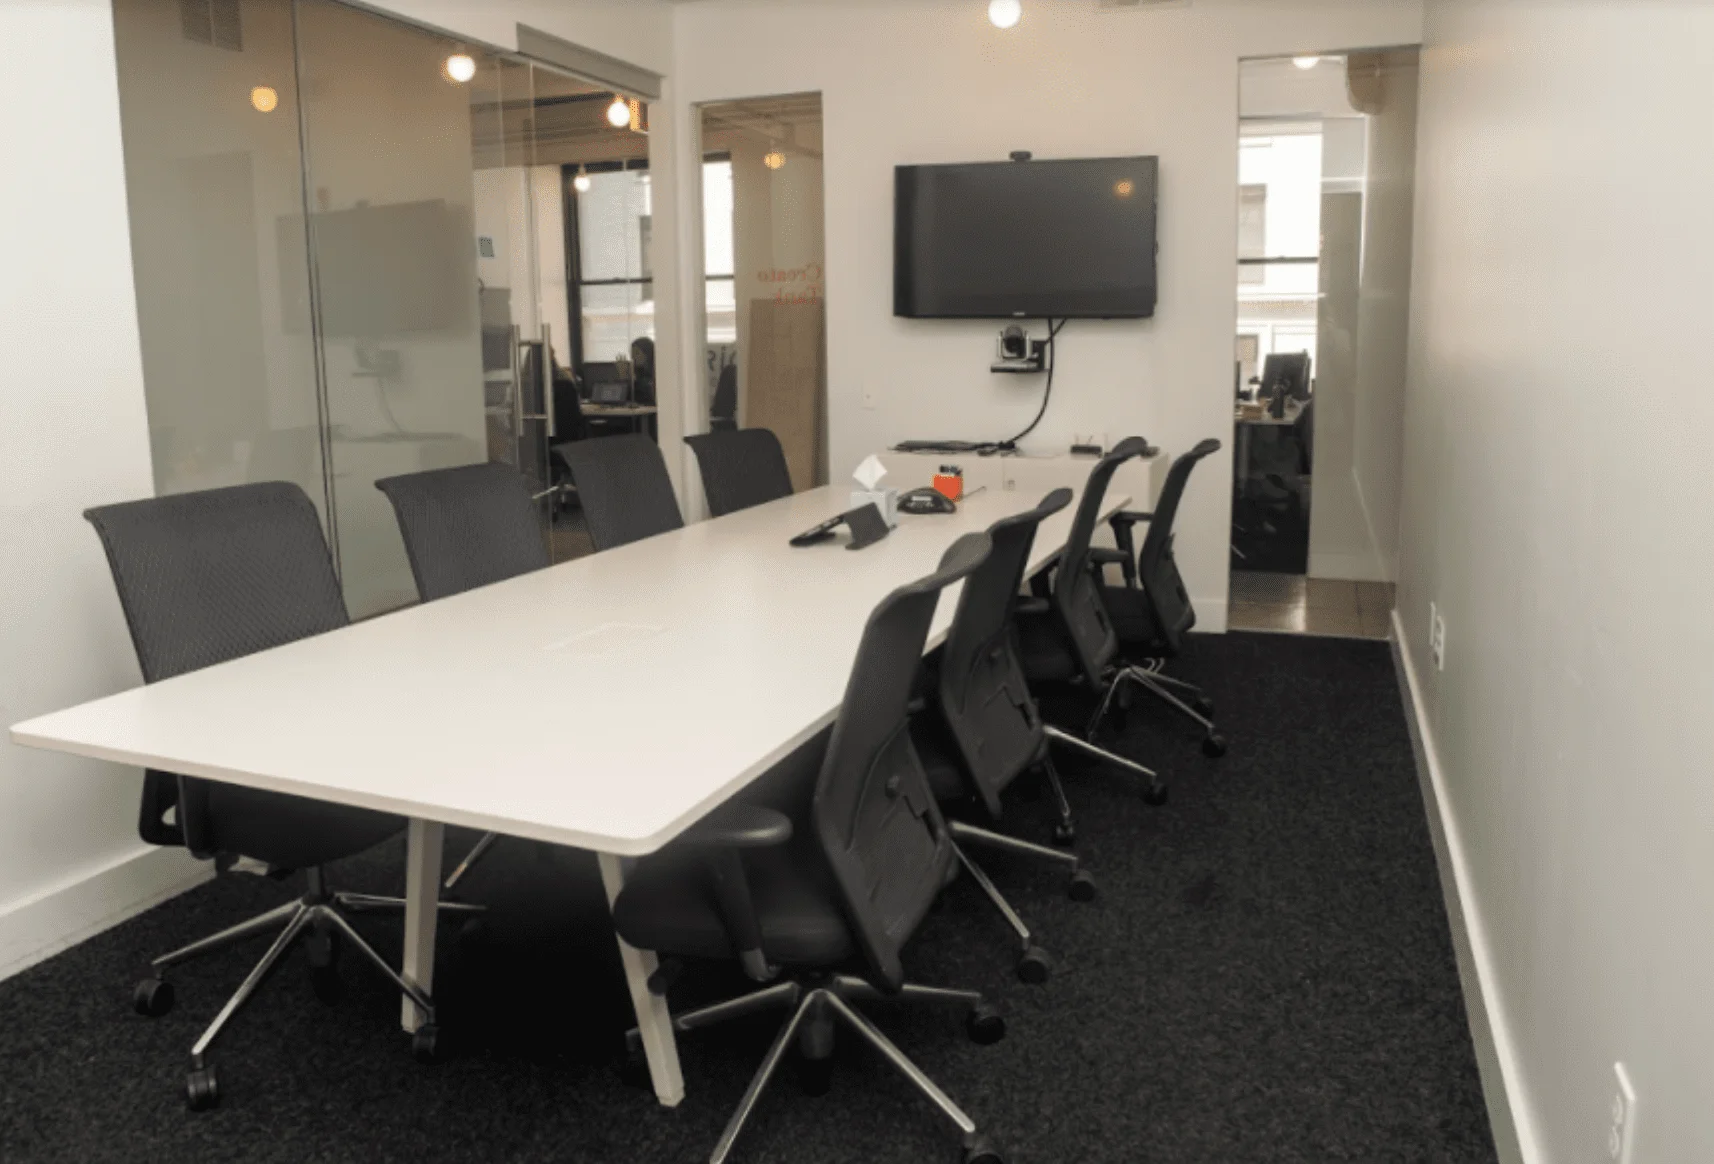 Rent a boardroom to elevate your meetings and impress clients in a professional setting.